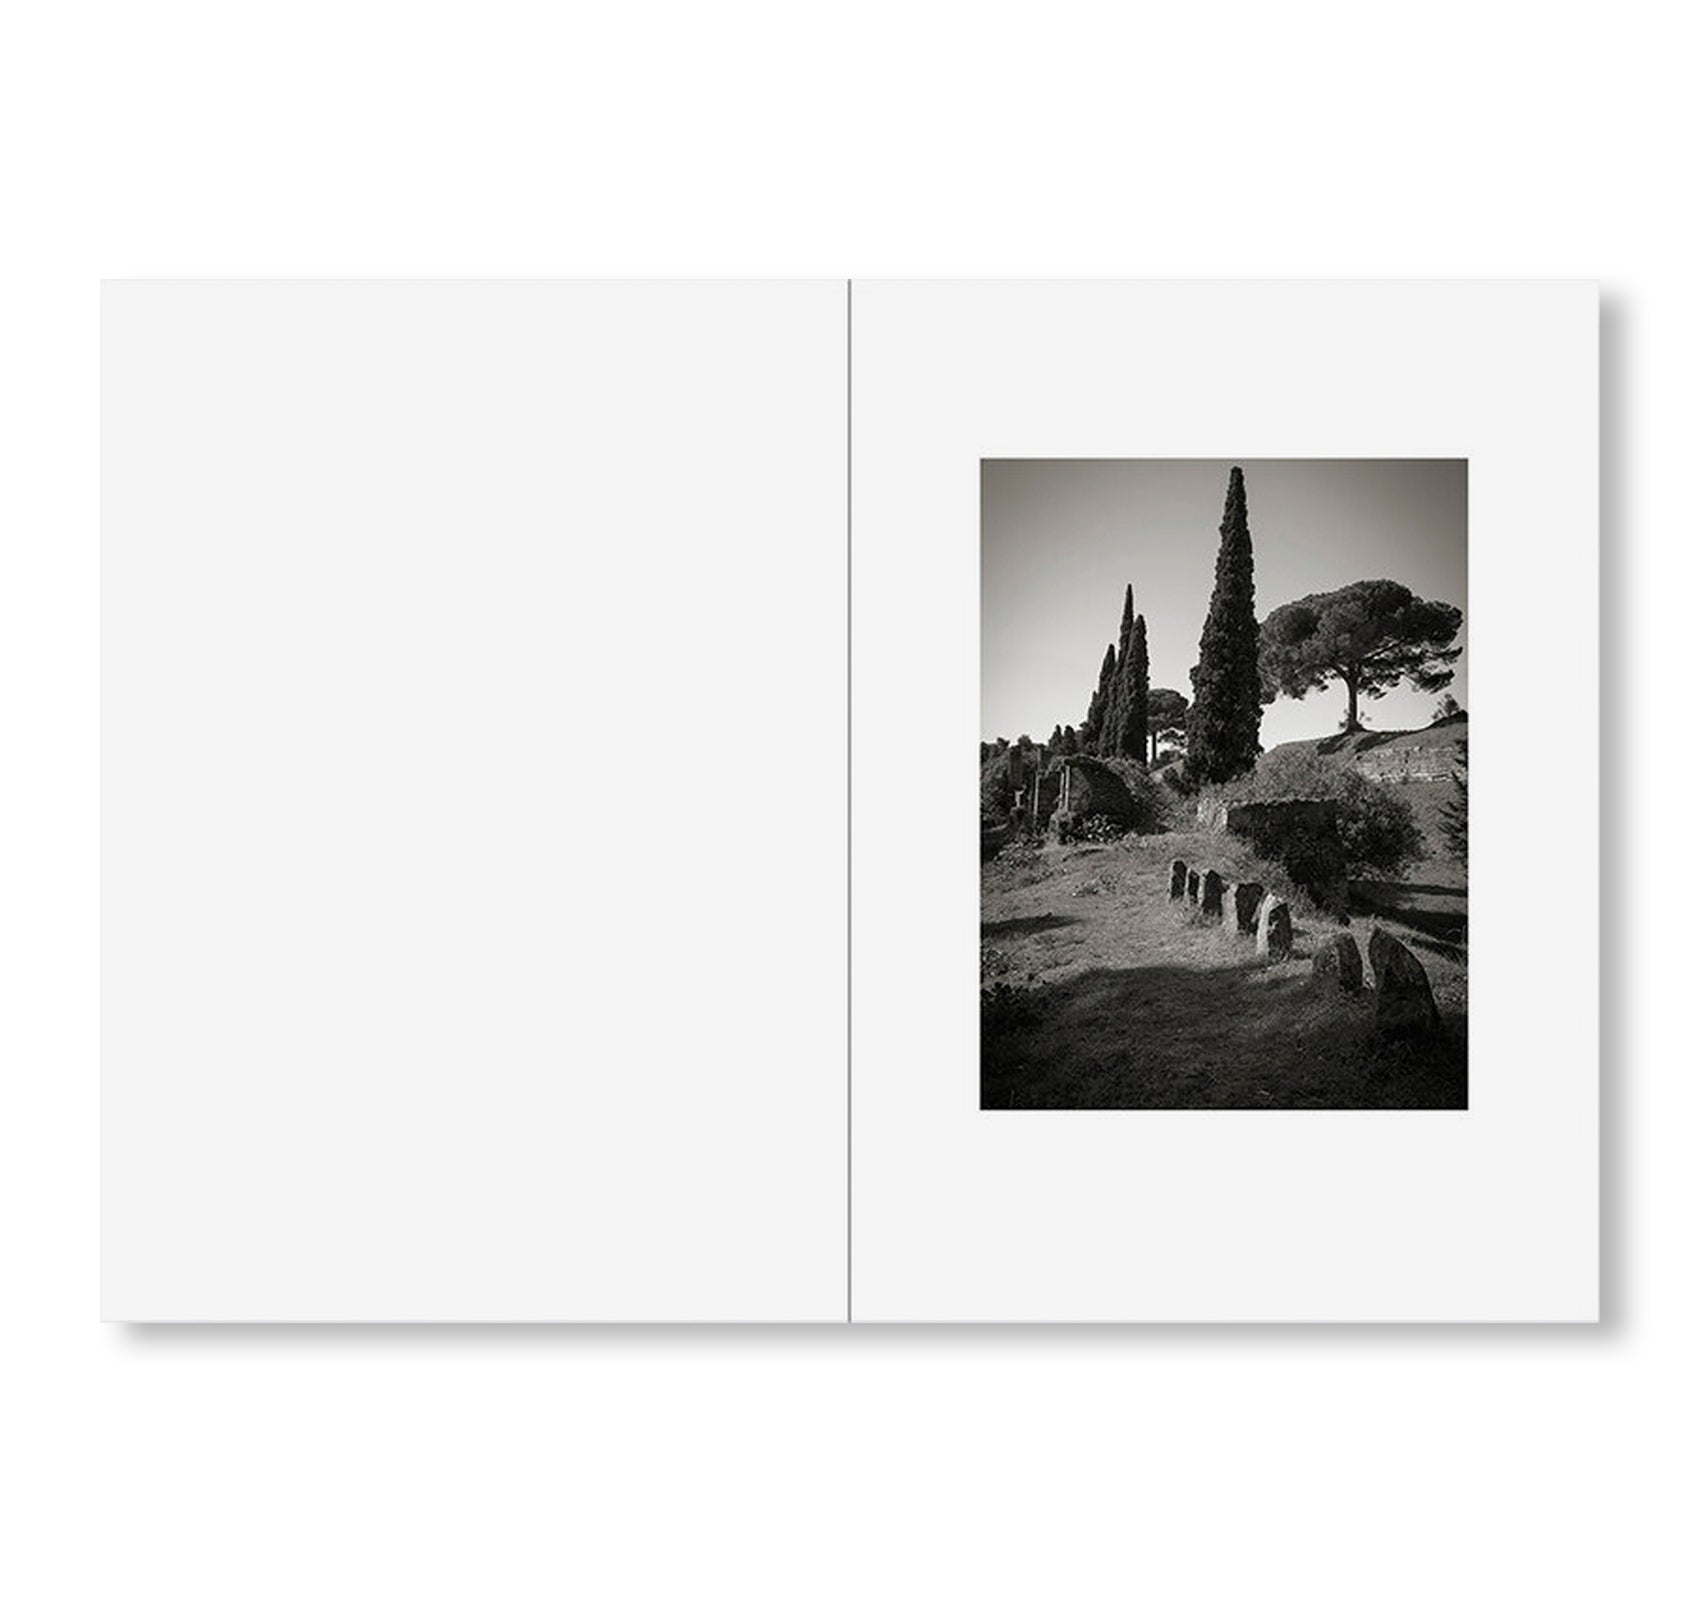 ONE PICTURE BOOK TWO #15: REQUIEM by Kenro Izu